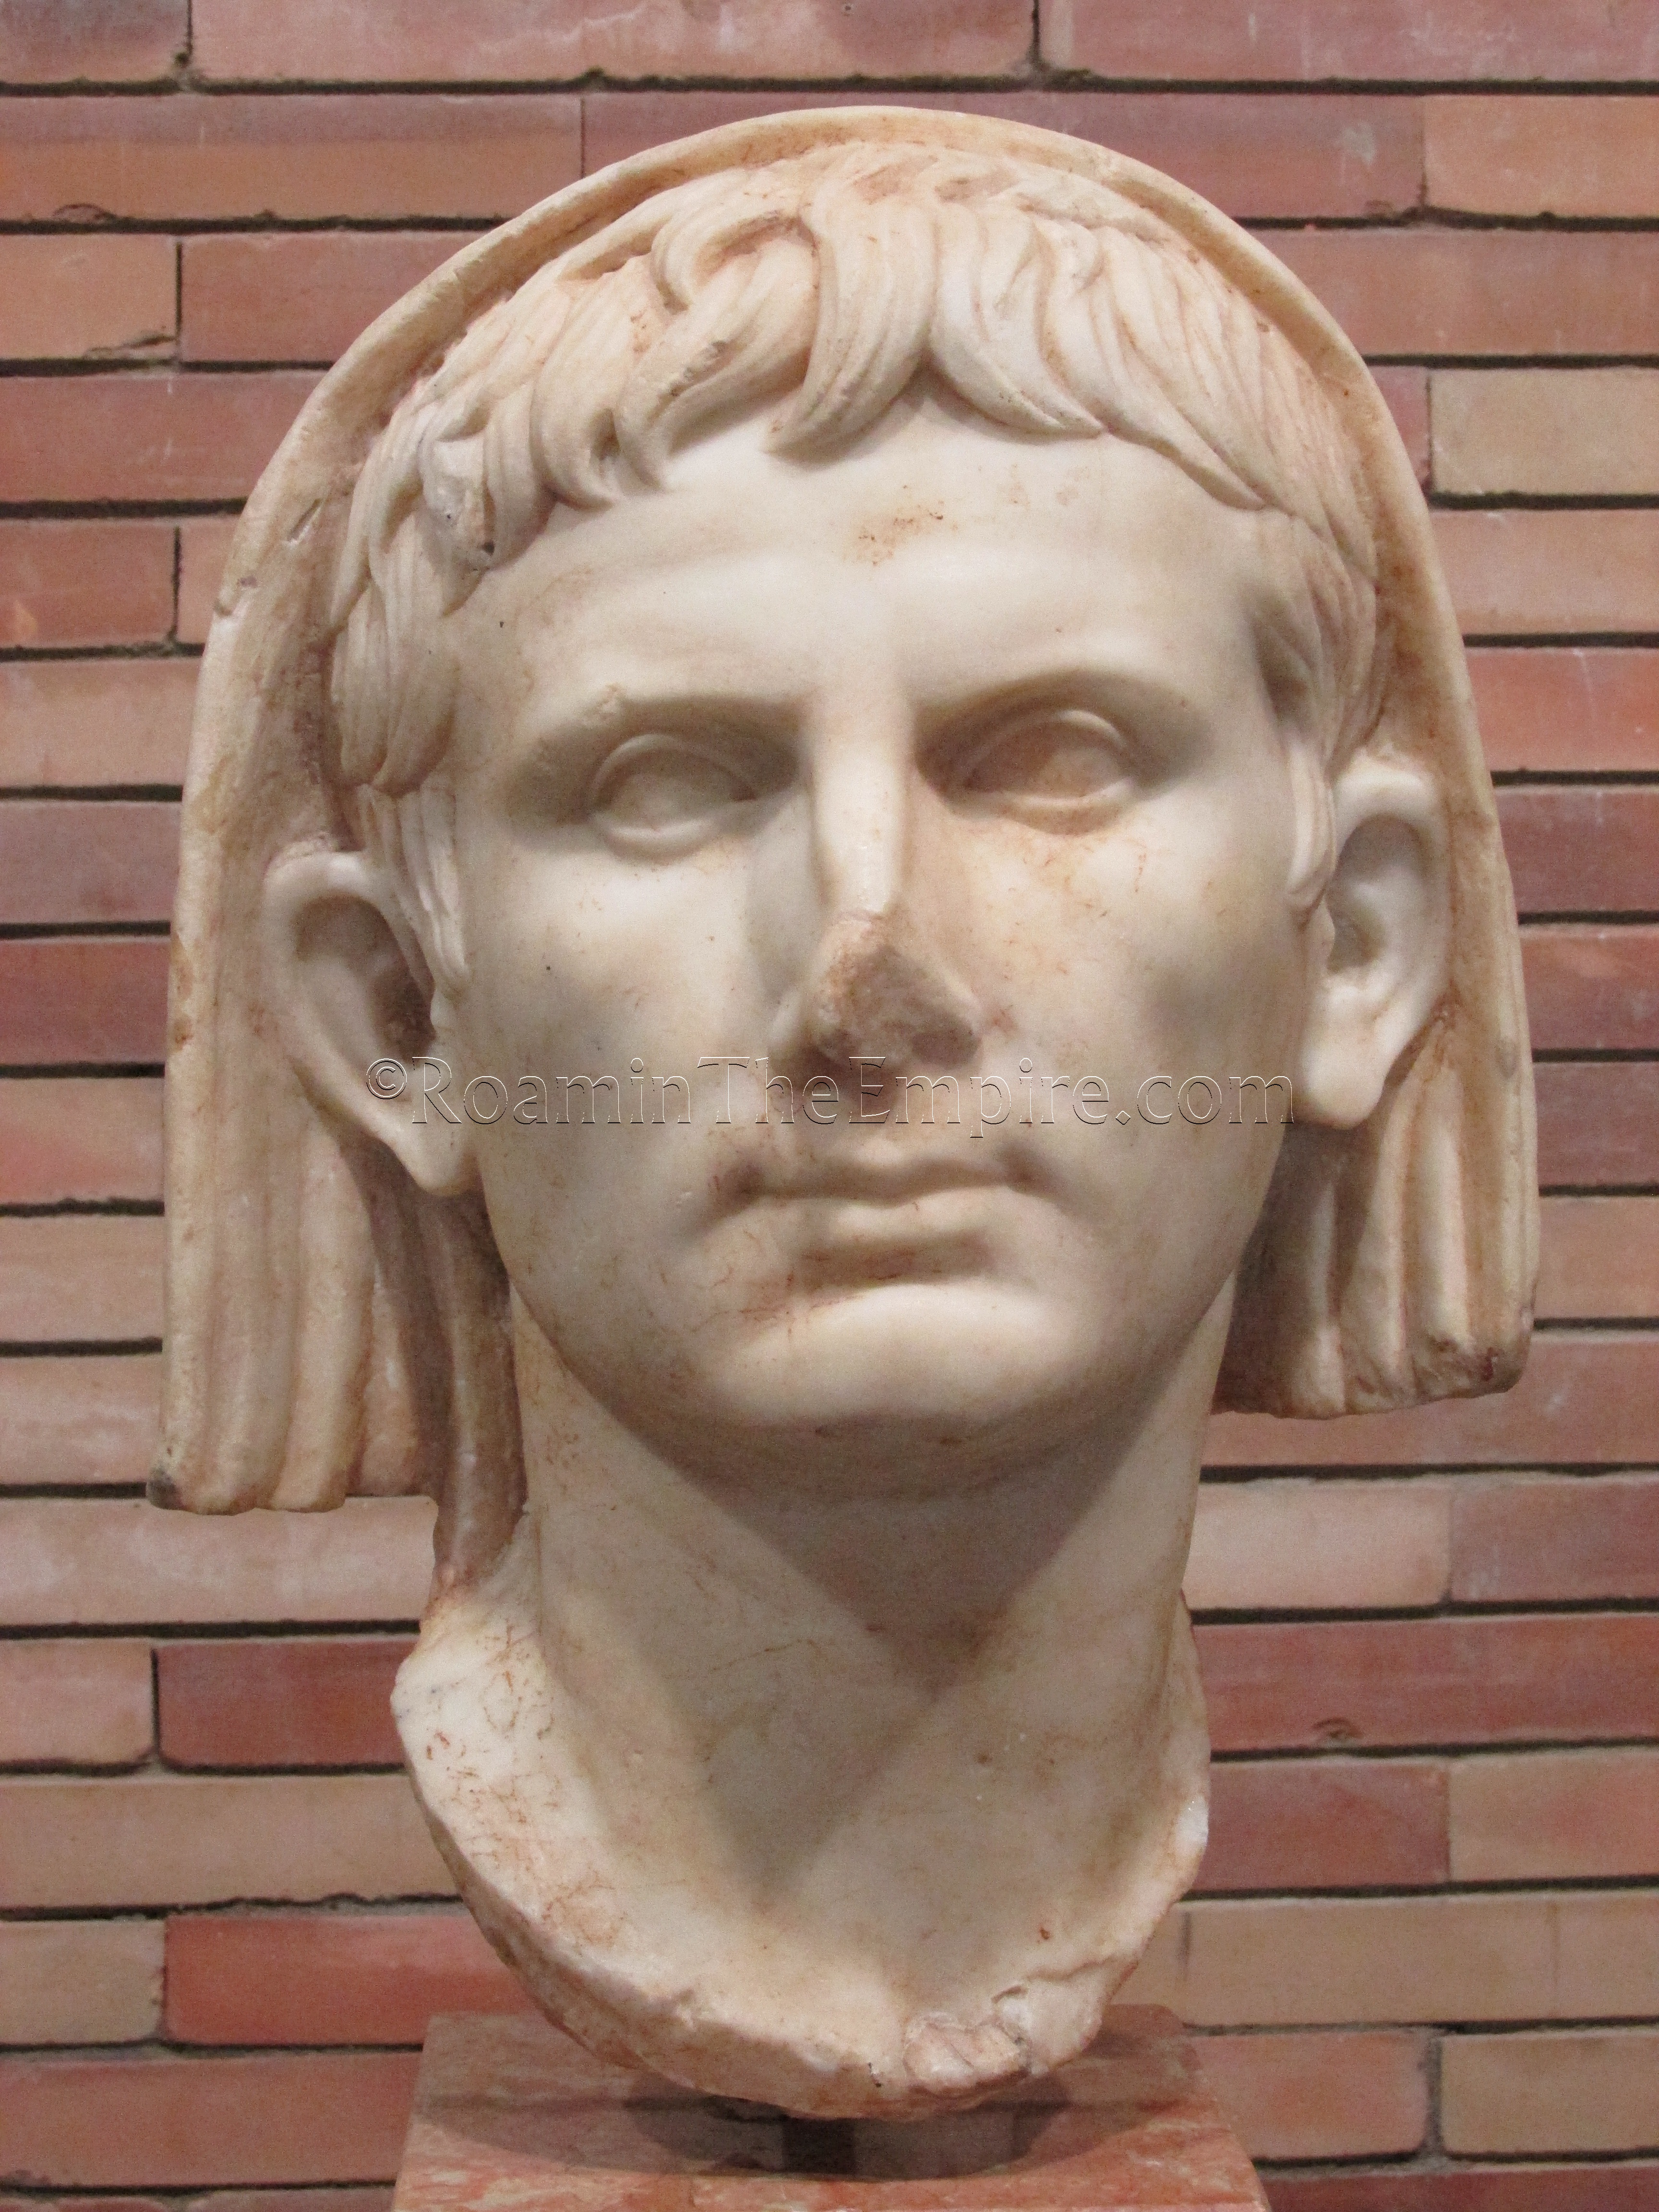 Head of Augustus from the Aula Sacra of the theater. From the 1st century CE. Augusta Emerita.